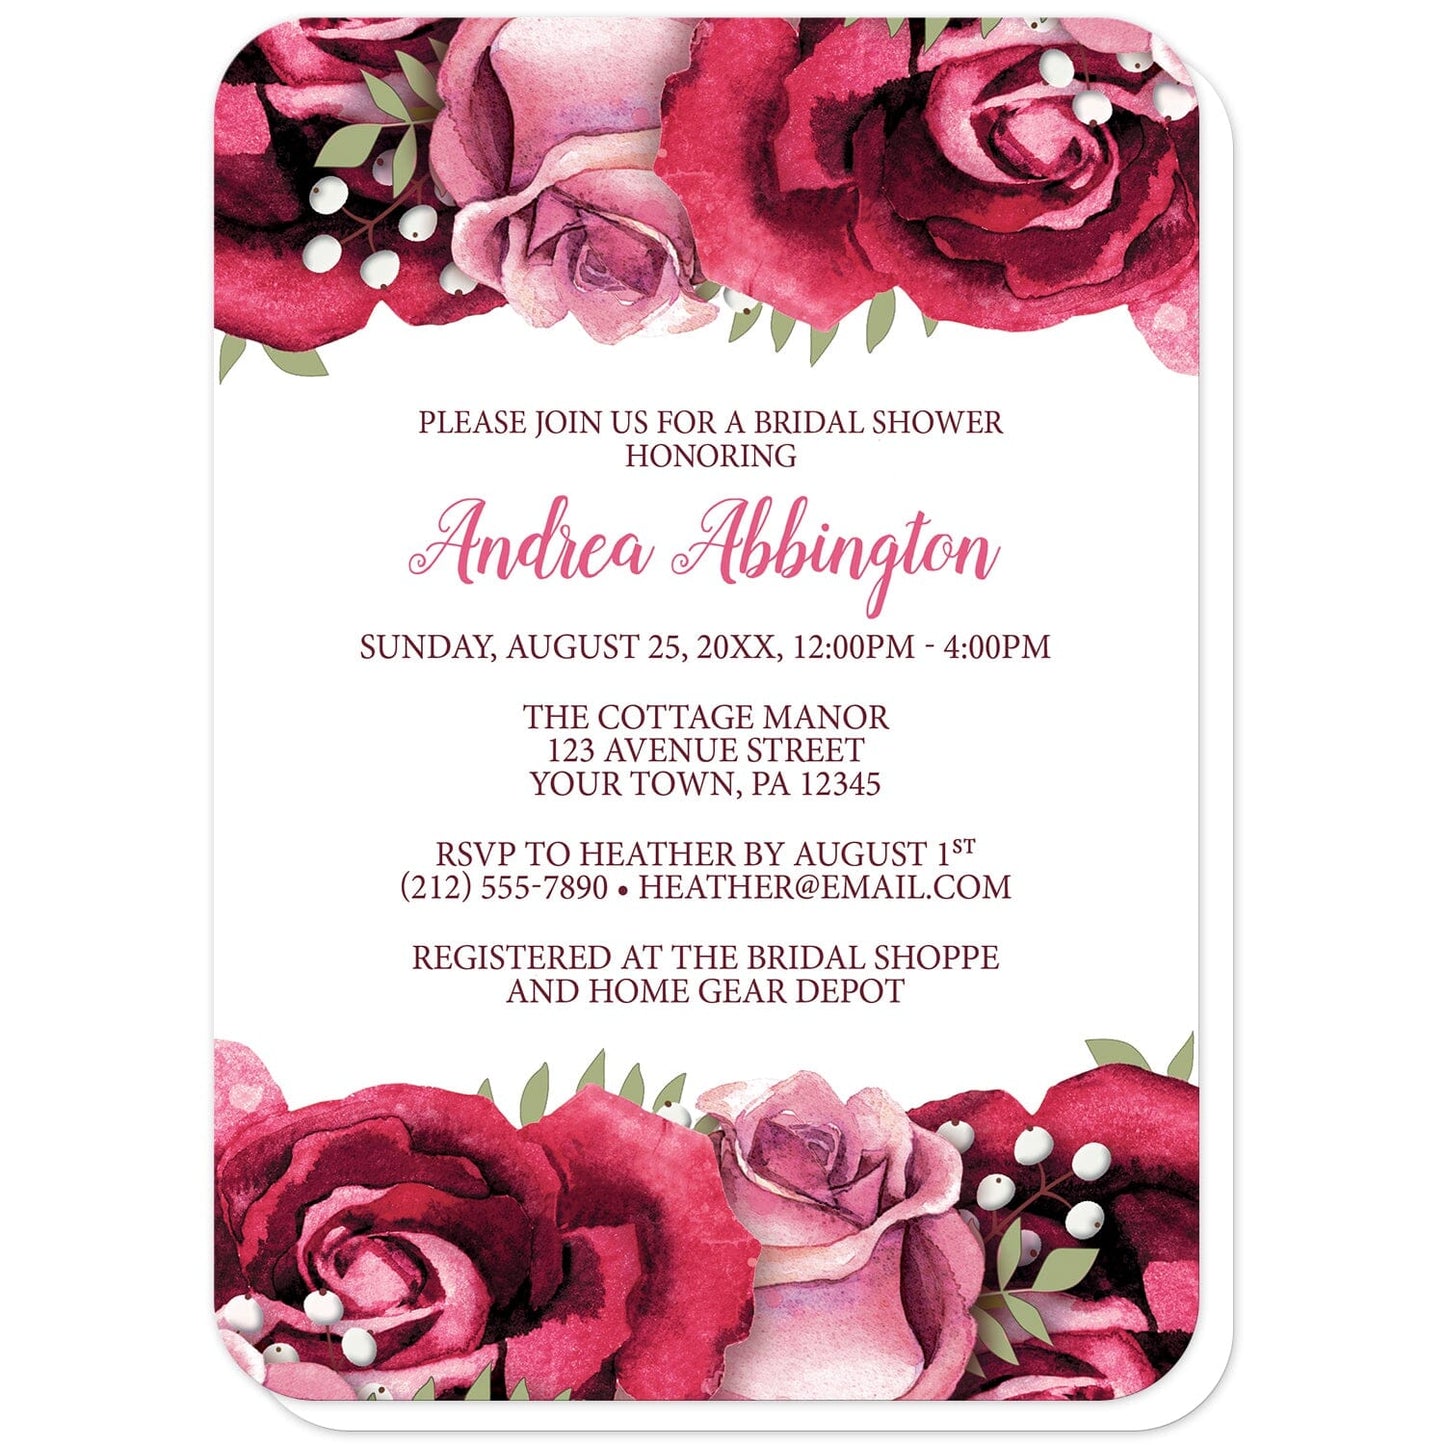 Rustic Burgundy Pink Rose White Bridal Shower Invitations (with rounded corners) at Artistically Invited. Rustic burgundy pink rose white bridal shower invitations with beautiful burgundy red and pink roses along the top and bottom over a white background. Your personalized bridal shower celebration details are custom printed in light and dark burgundy on white in the center between the roses.